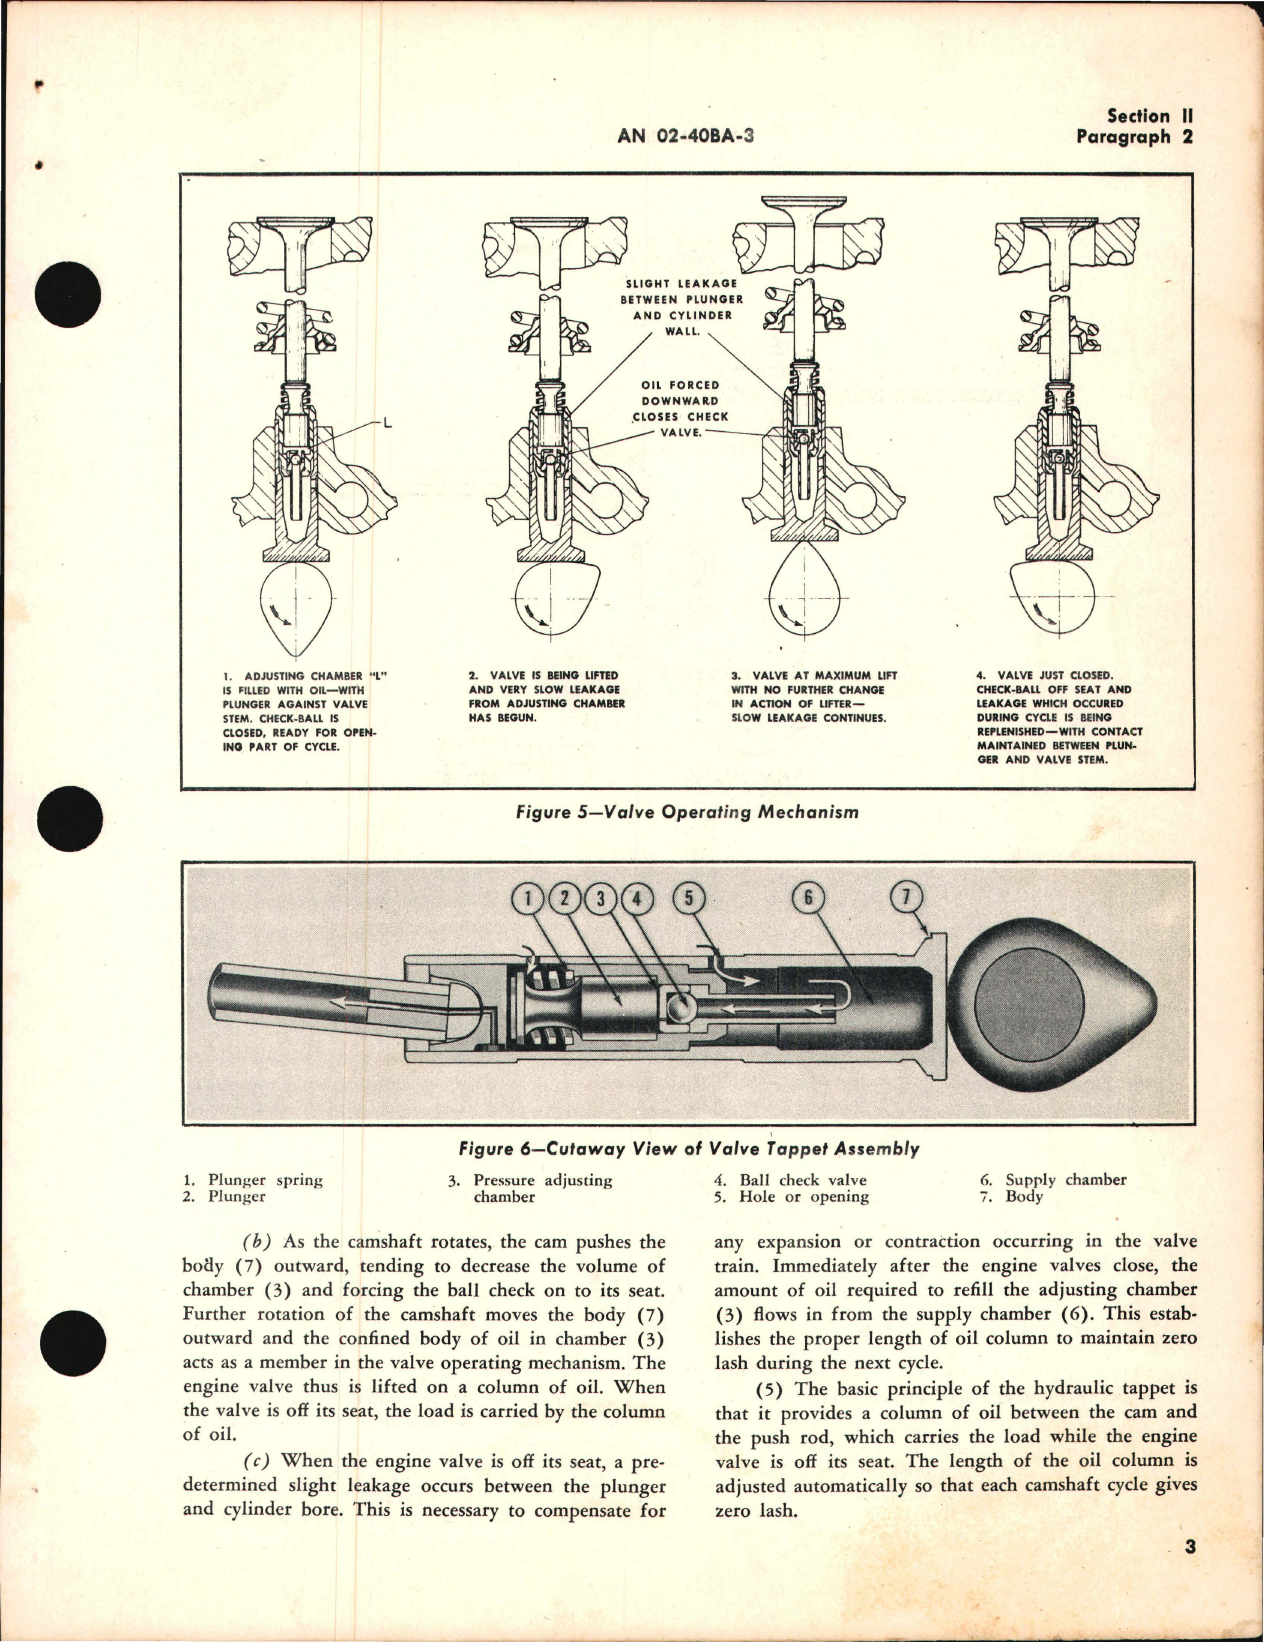 Sample page 7 from AirCorps Library document: Overhaul Instructions for O-170-3 and O-170-7 Engines